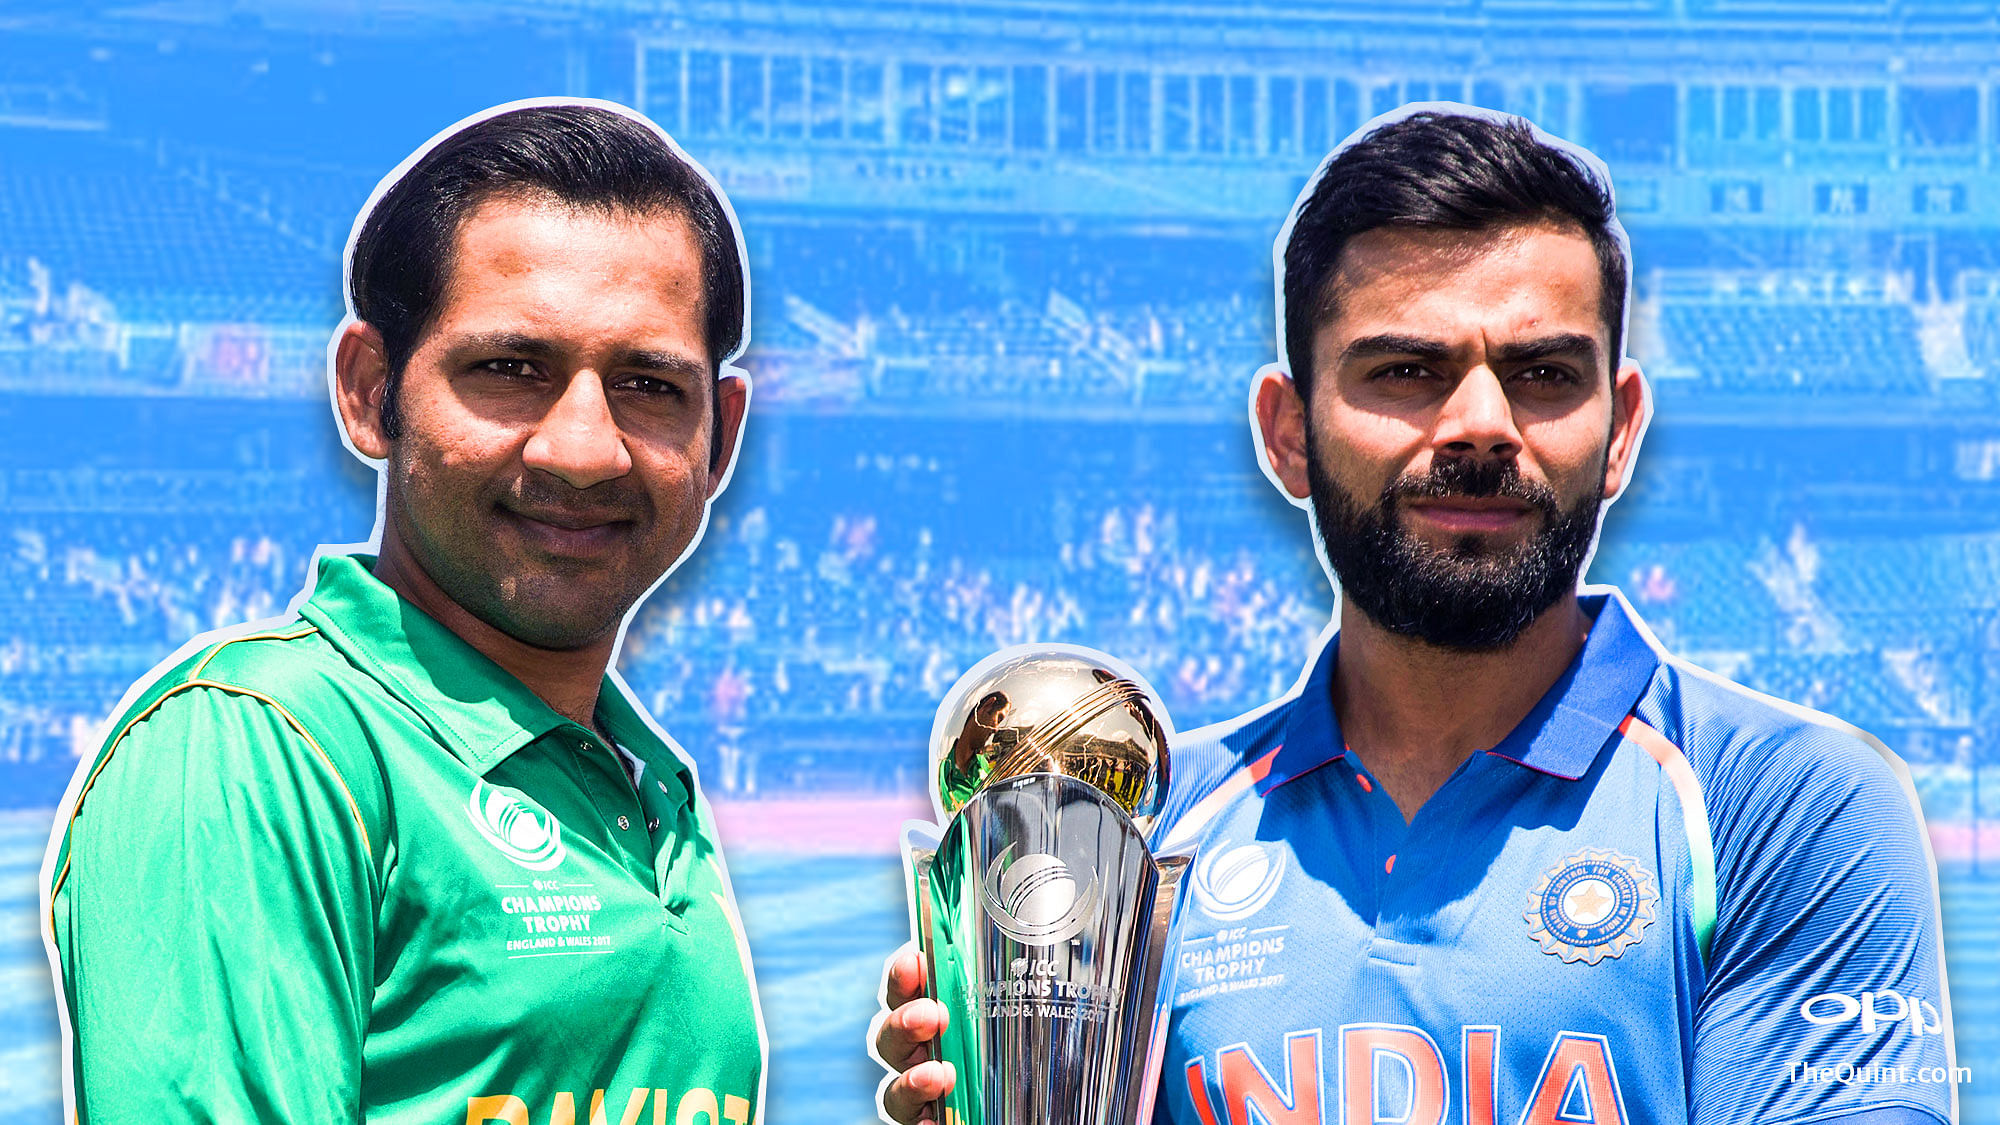 Sarfraz Ahmed (L) and Virat Kohli (R) pose with the Champions Trophy ahead of the final. (Photo: AP/Altered by <b>The Quint</b>)